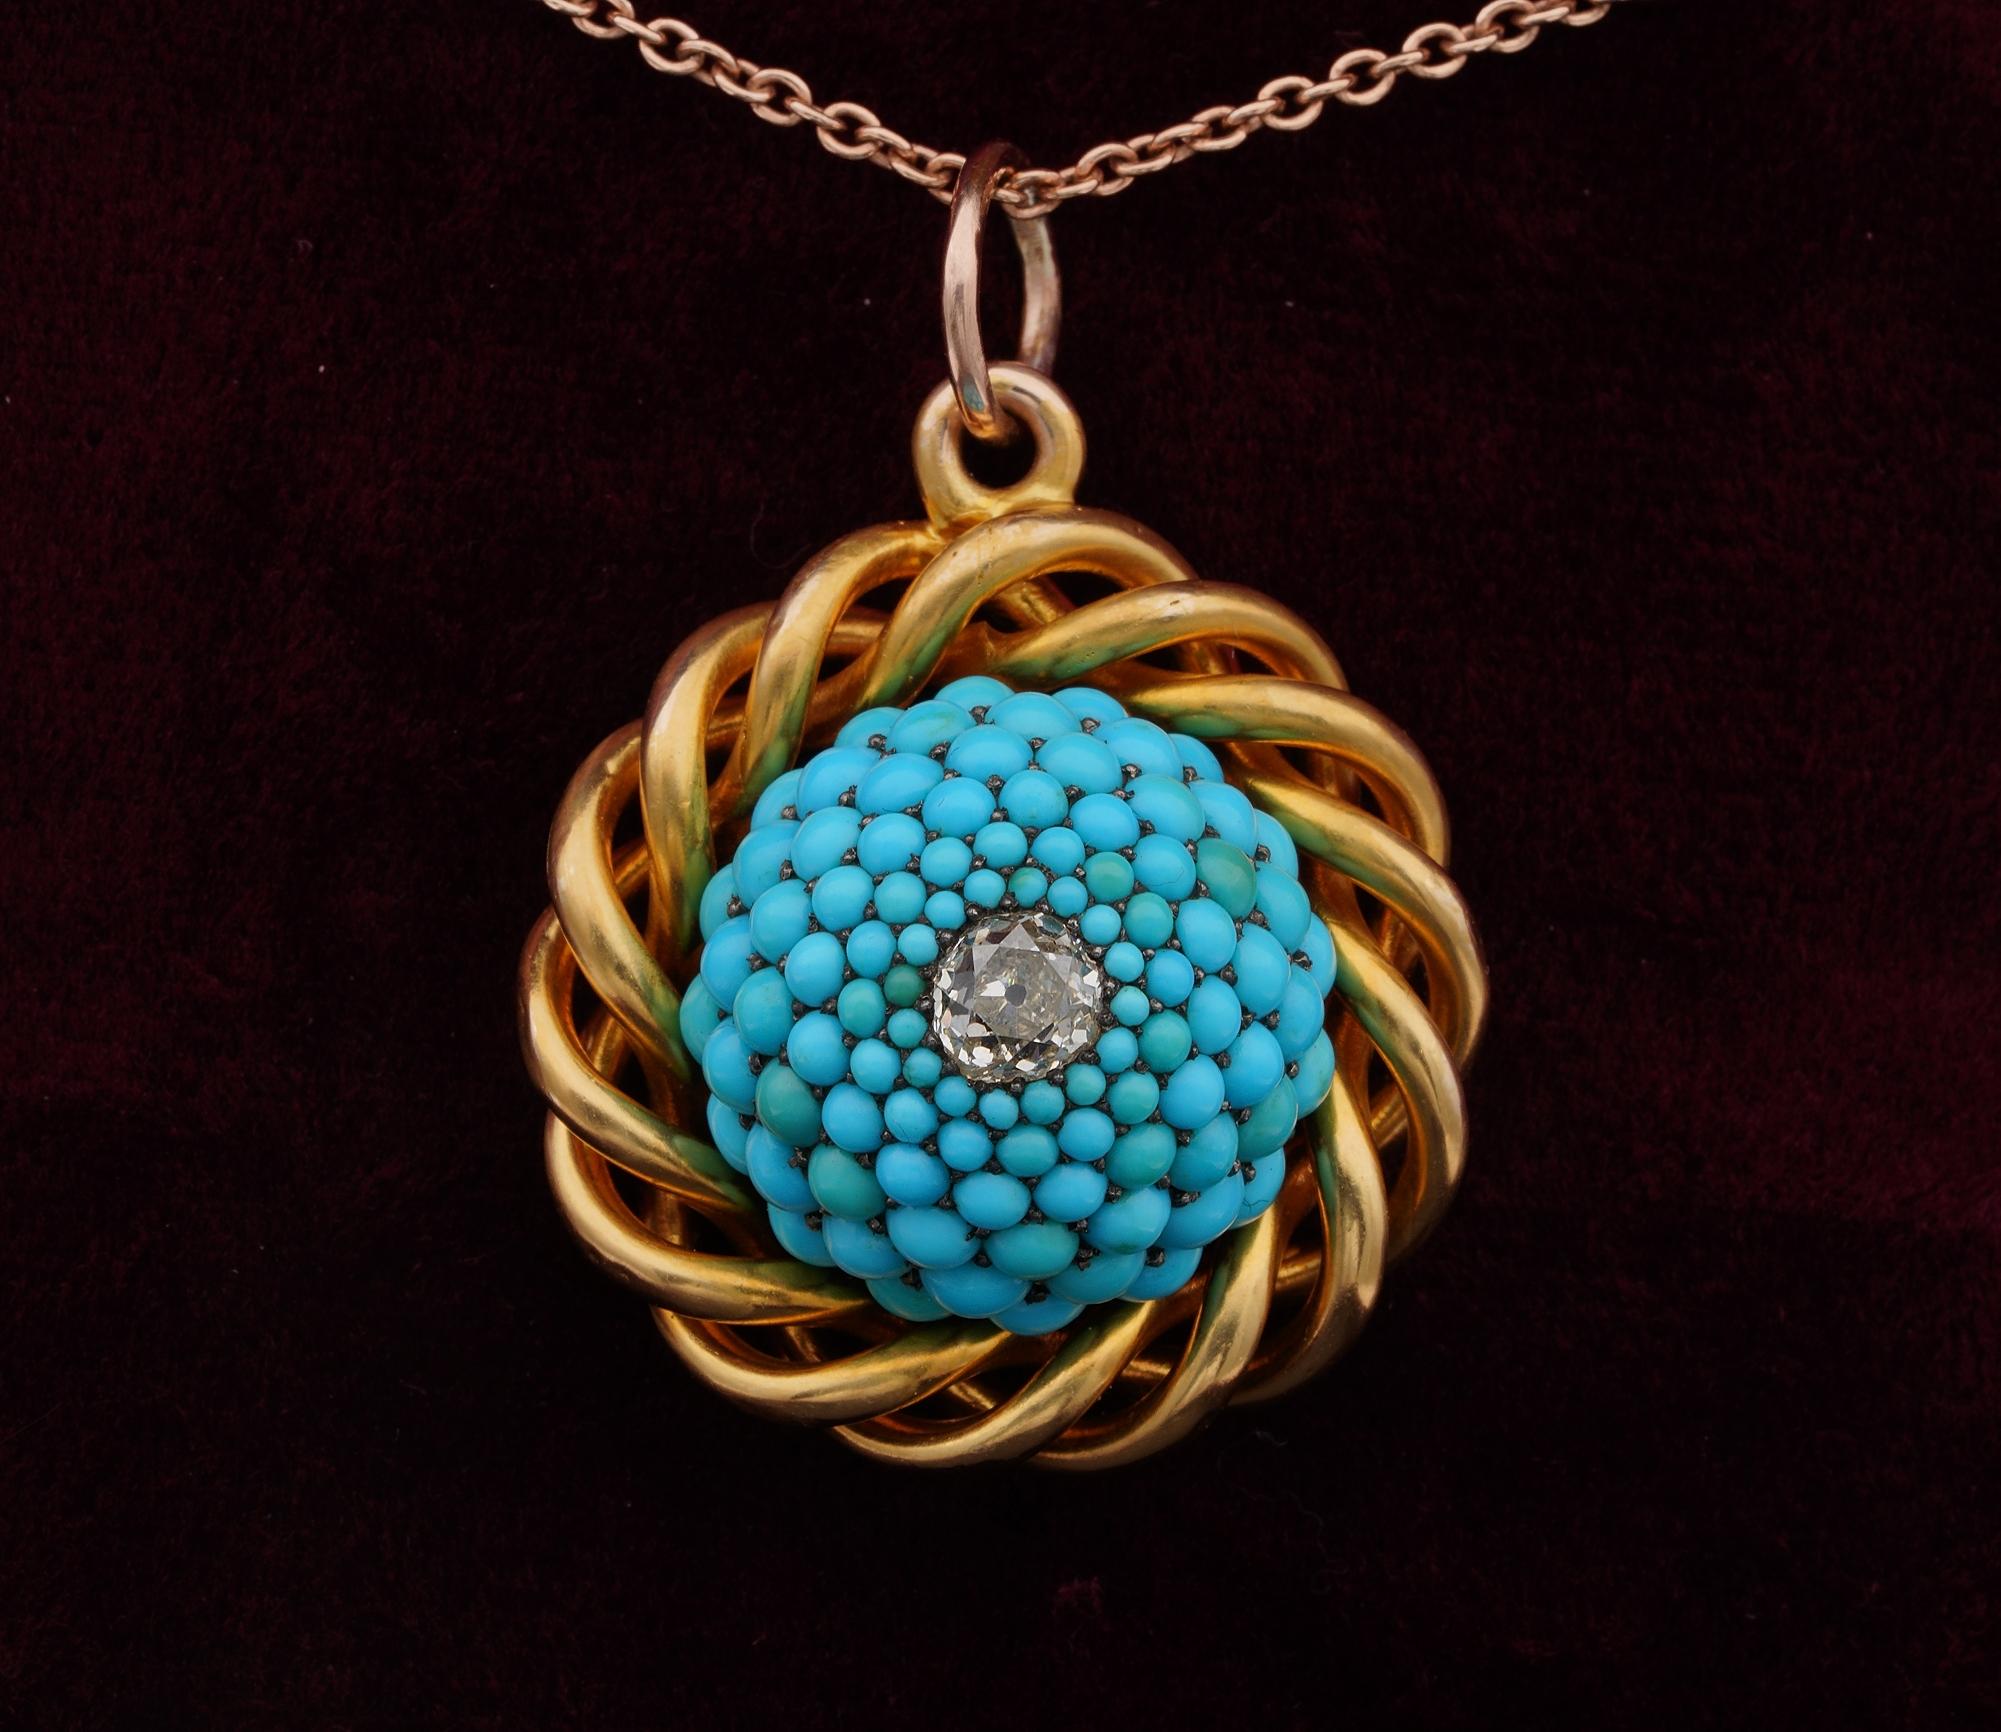 Love Keeper

This beautiful Victorian locket pendant has been hand crafted of solid 18 KT solid gold during 1880 ca
Beautiful designed, boasts a thick gold twisted frame surrounding the main domed part made of wonderful pave' set natural turquoise